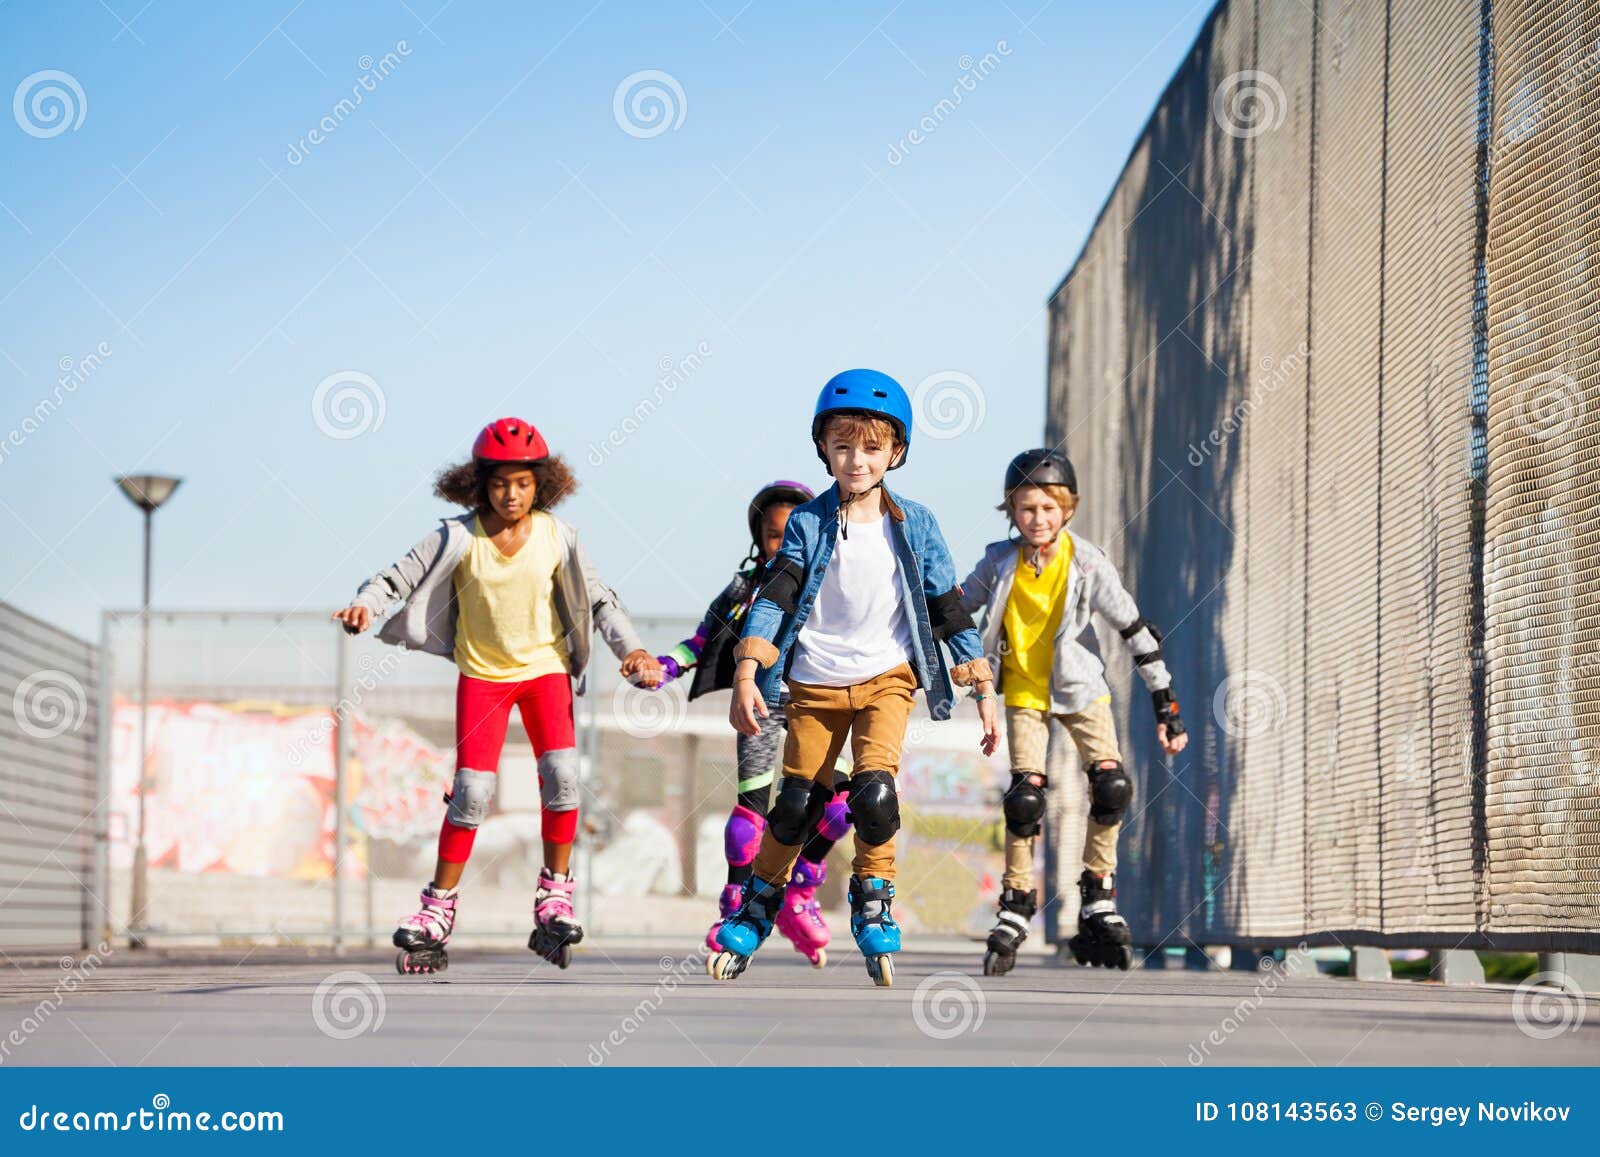 cute kids on roller skates riding outdoors